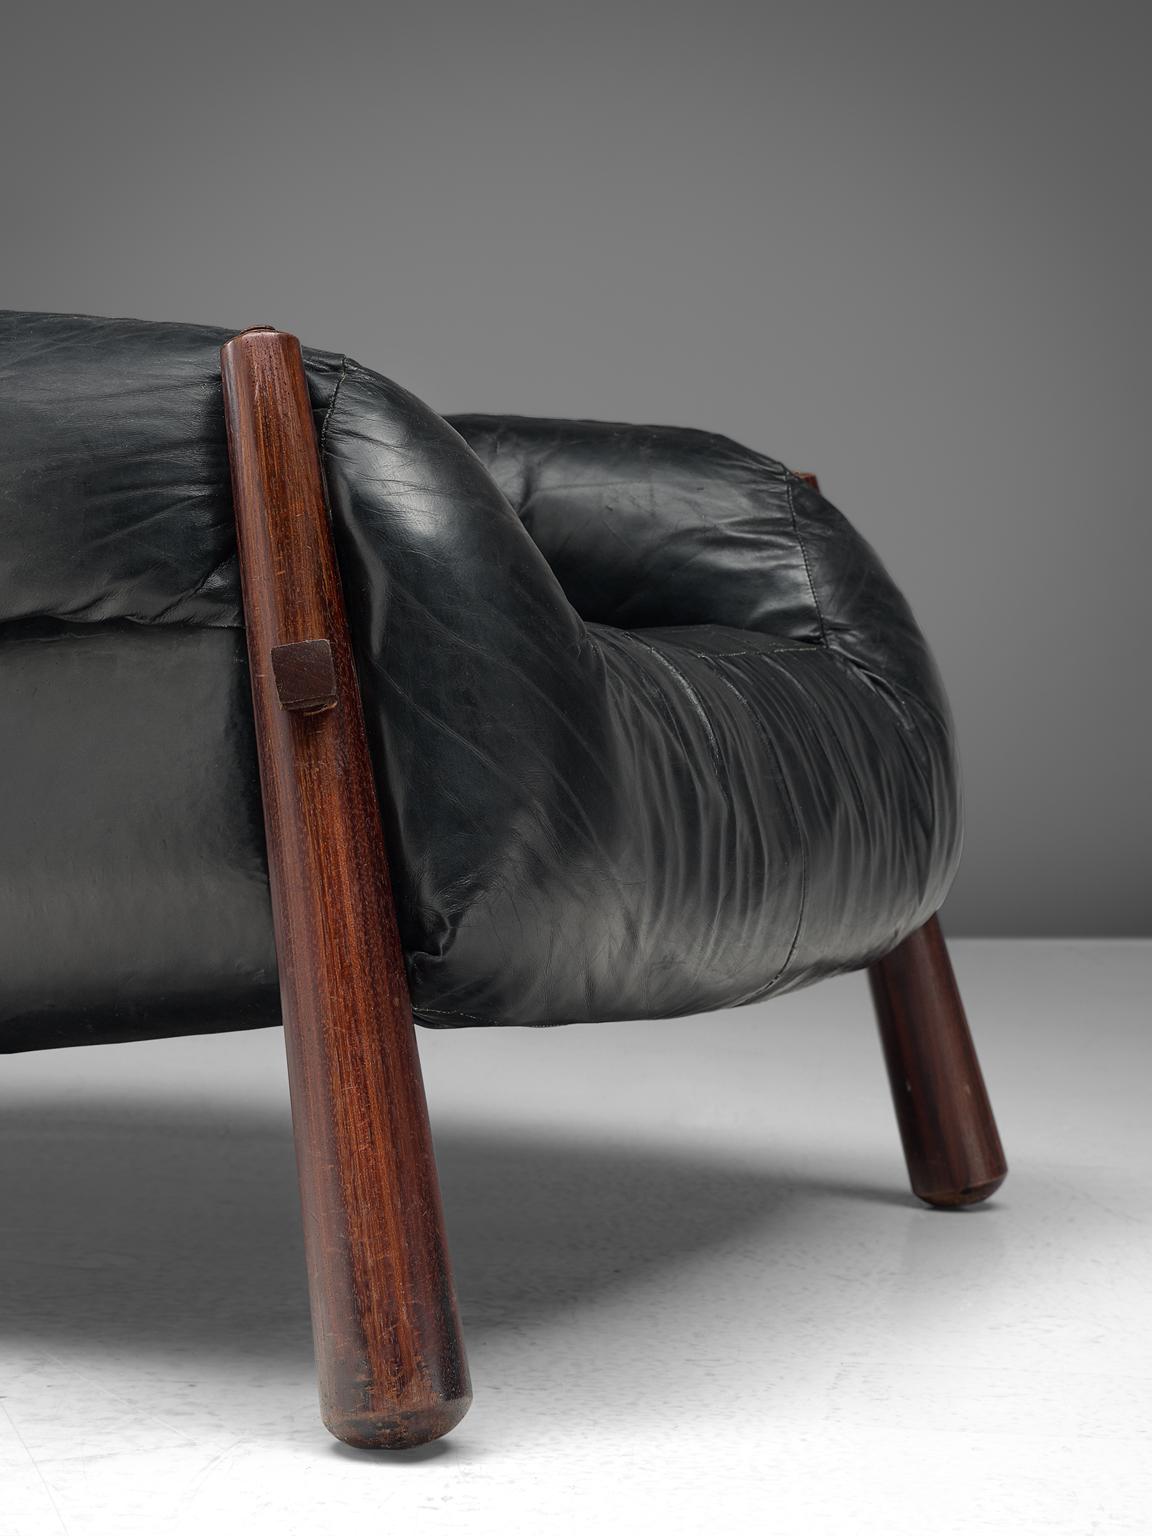 Leather Percival Lafer Pair of 'MP-81' Lounge Chairs with Ottoman in Rosewood and Black